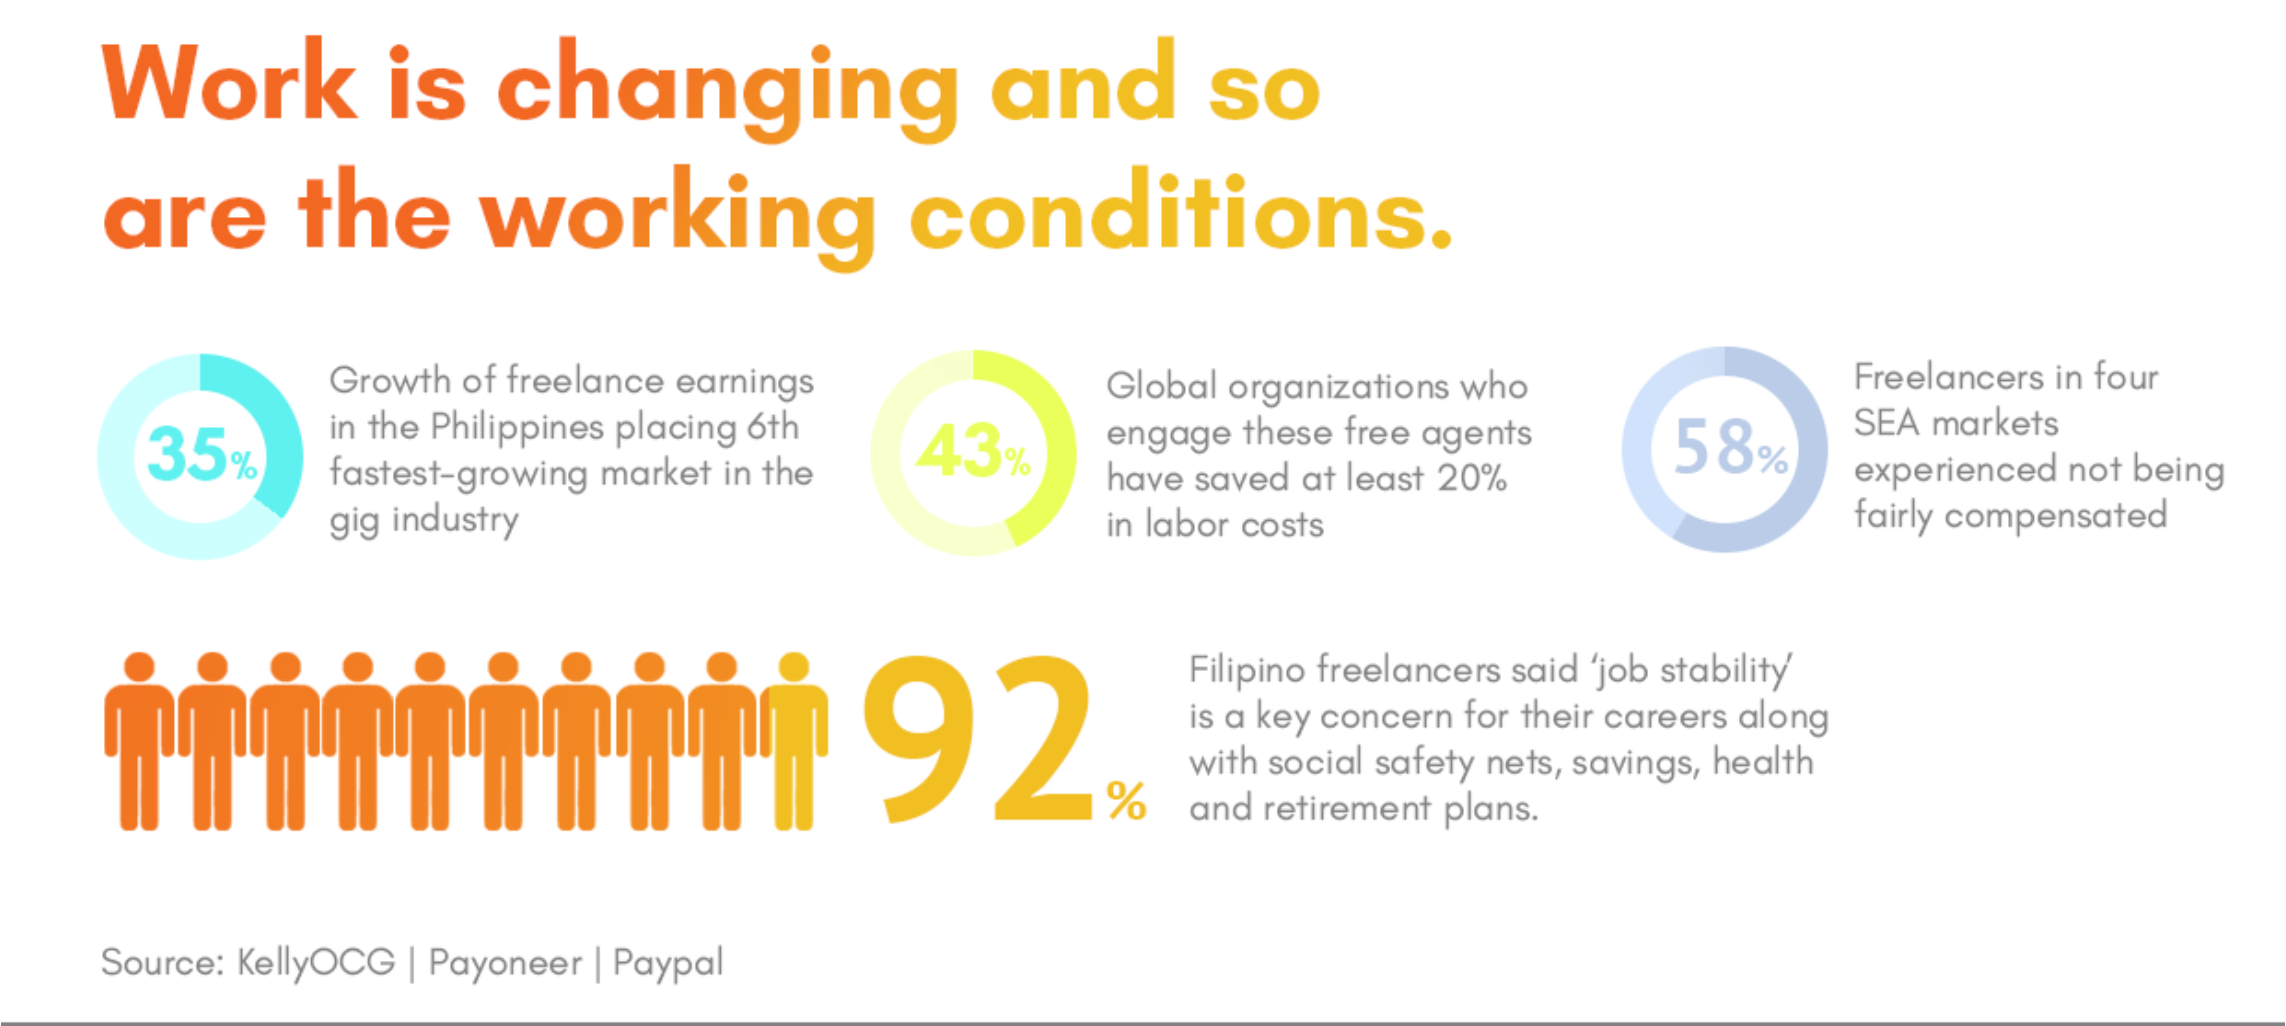 Work is changing and so are the working conditions. Growth of freelance earnings in the Philippines placing 6th fastest-growing market in the gig industry. Global organizations who engage these free agents have saved at least 20% in labor costs. Freelancers in four SEA markets experienced not being fairly compensated. Filipino freelancers said 'job stability' is a key concern for their careers along with social safety nets, savings, health and retirement plans.